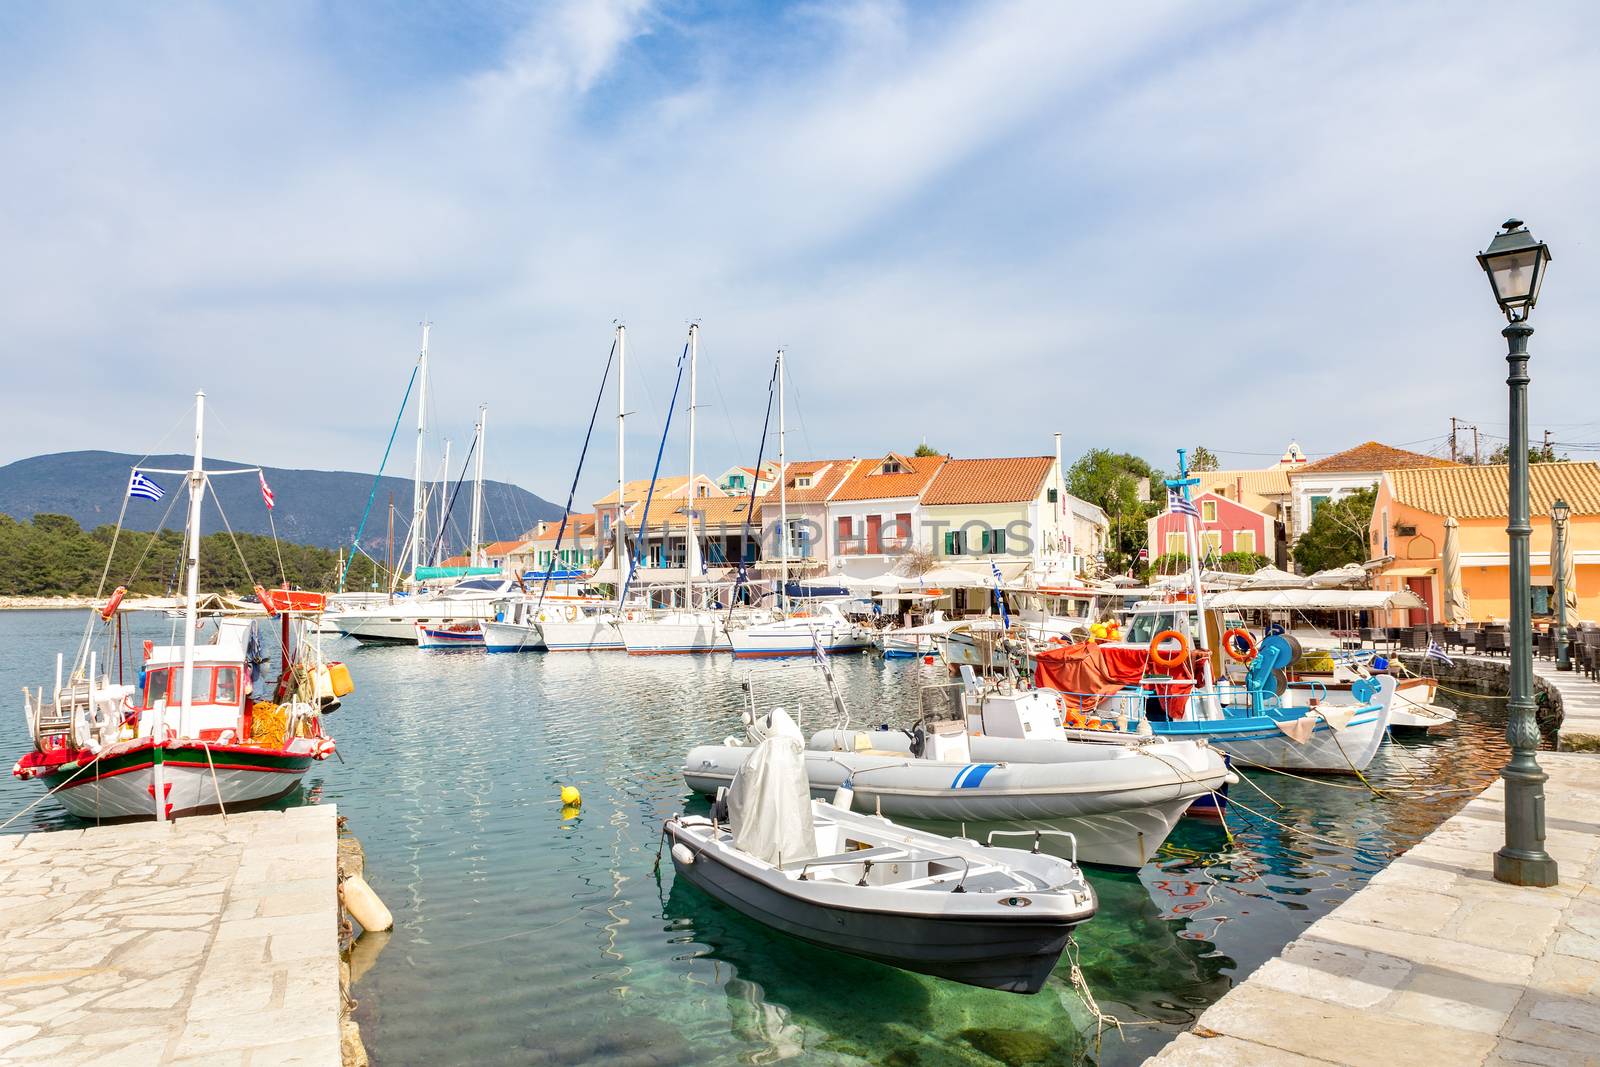 Greek harbor with sailing boats in Fiskardo by BenSchonewille